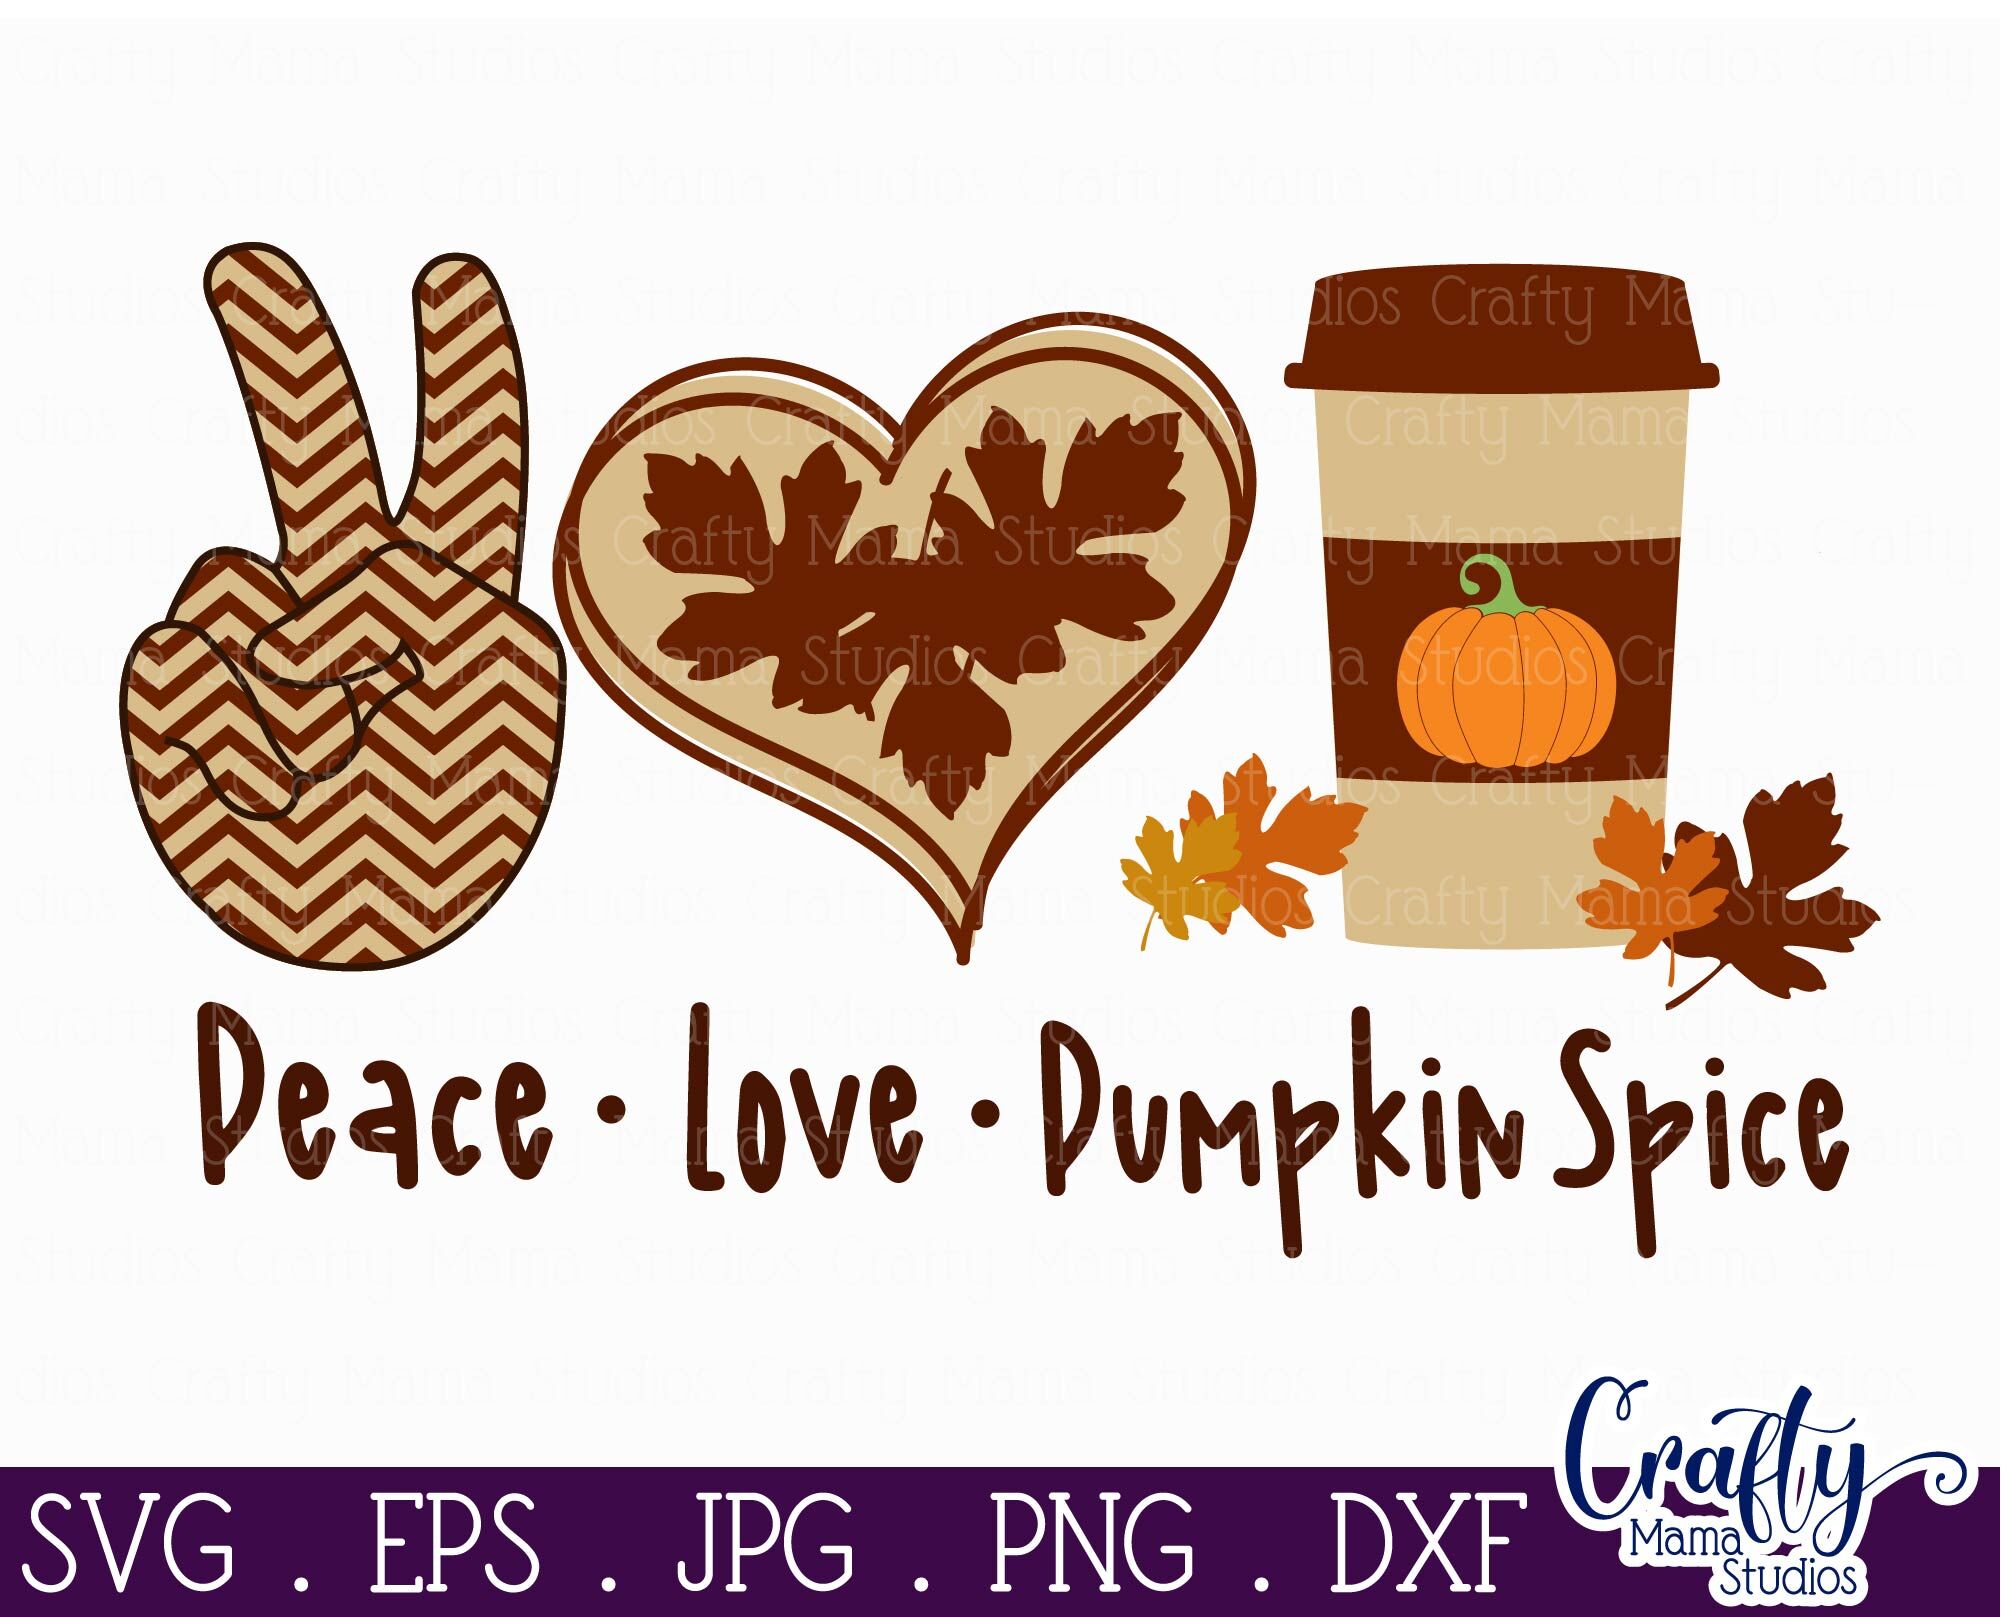 Download Pumpkin Spice Svg Fall Svg Cricut Cut File Autumn Svg Pumpkin Svg Living On Prayer And Pumpkin Spice Svg Png Jpg Dxf Religious Svg Drawing Illustration Art Collectibles Sultraline Id